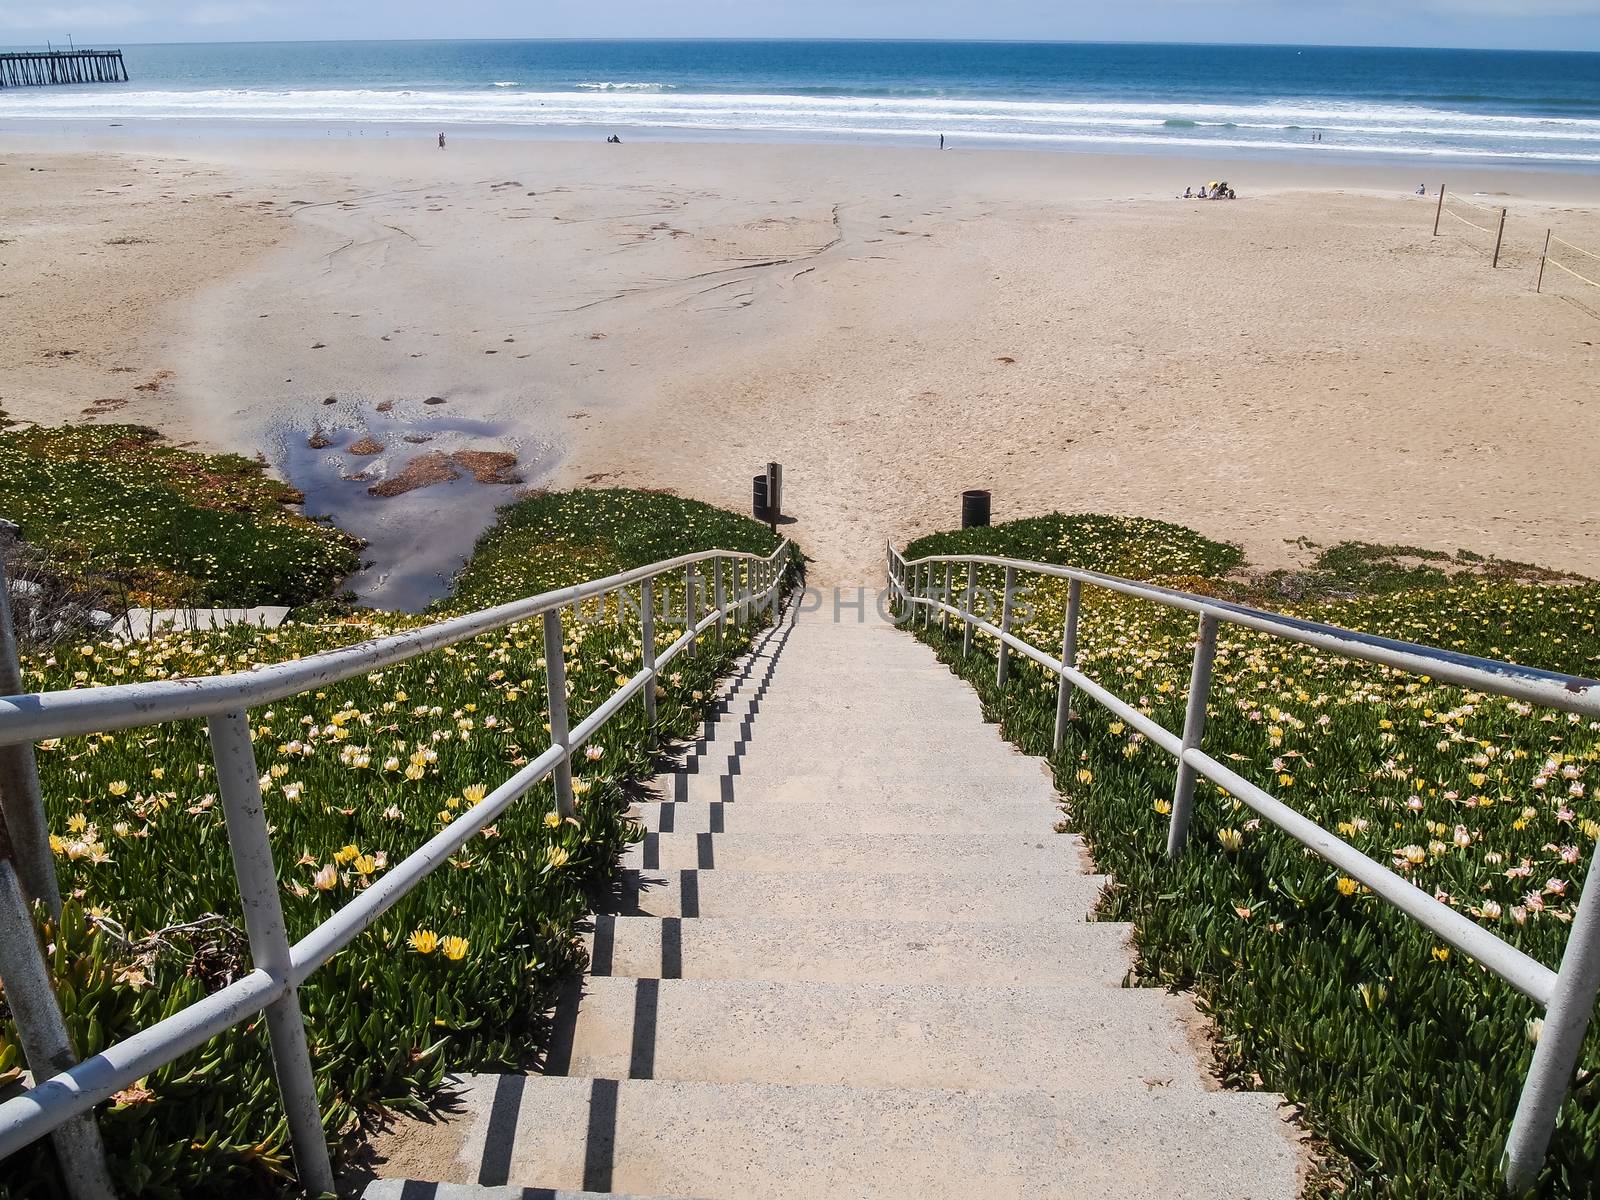 stairs down to the beach in California USA.